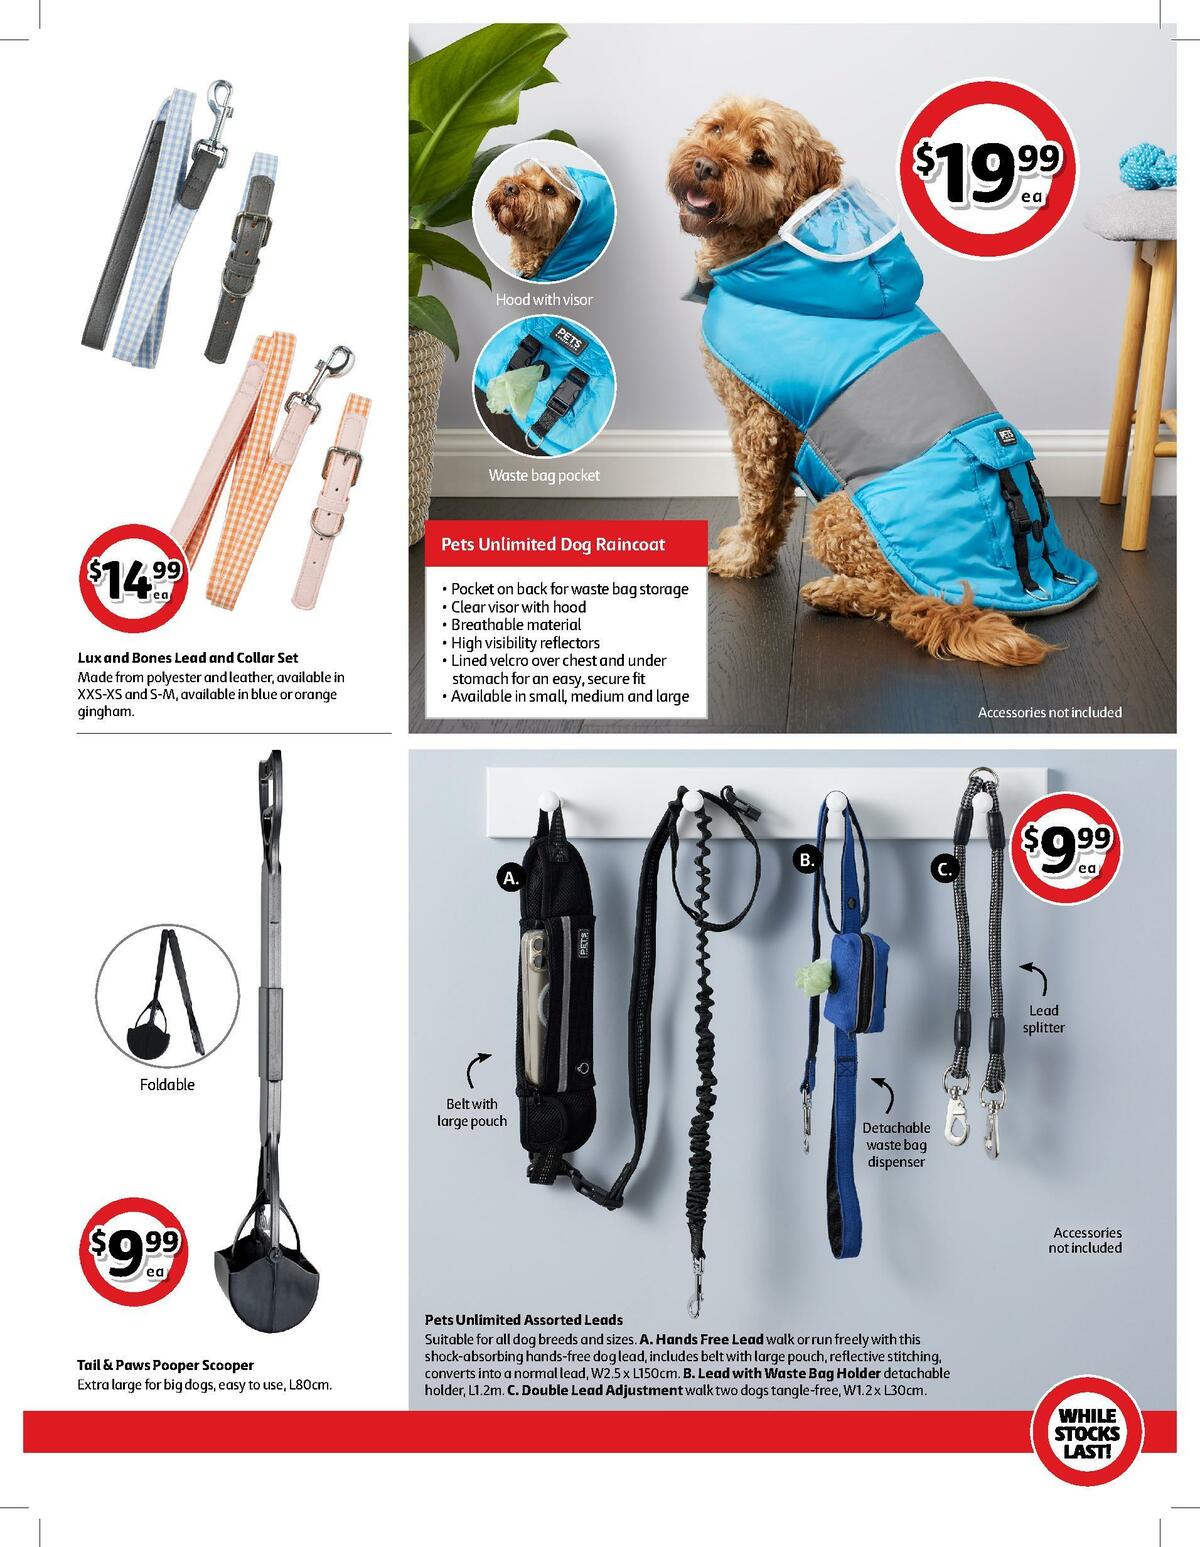 Coles Best Buys - Perfect for Pets Catalogues from 20 May